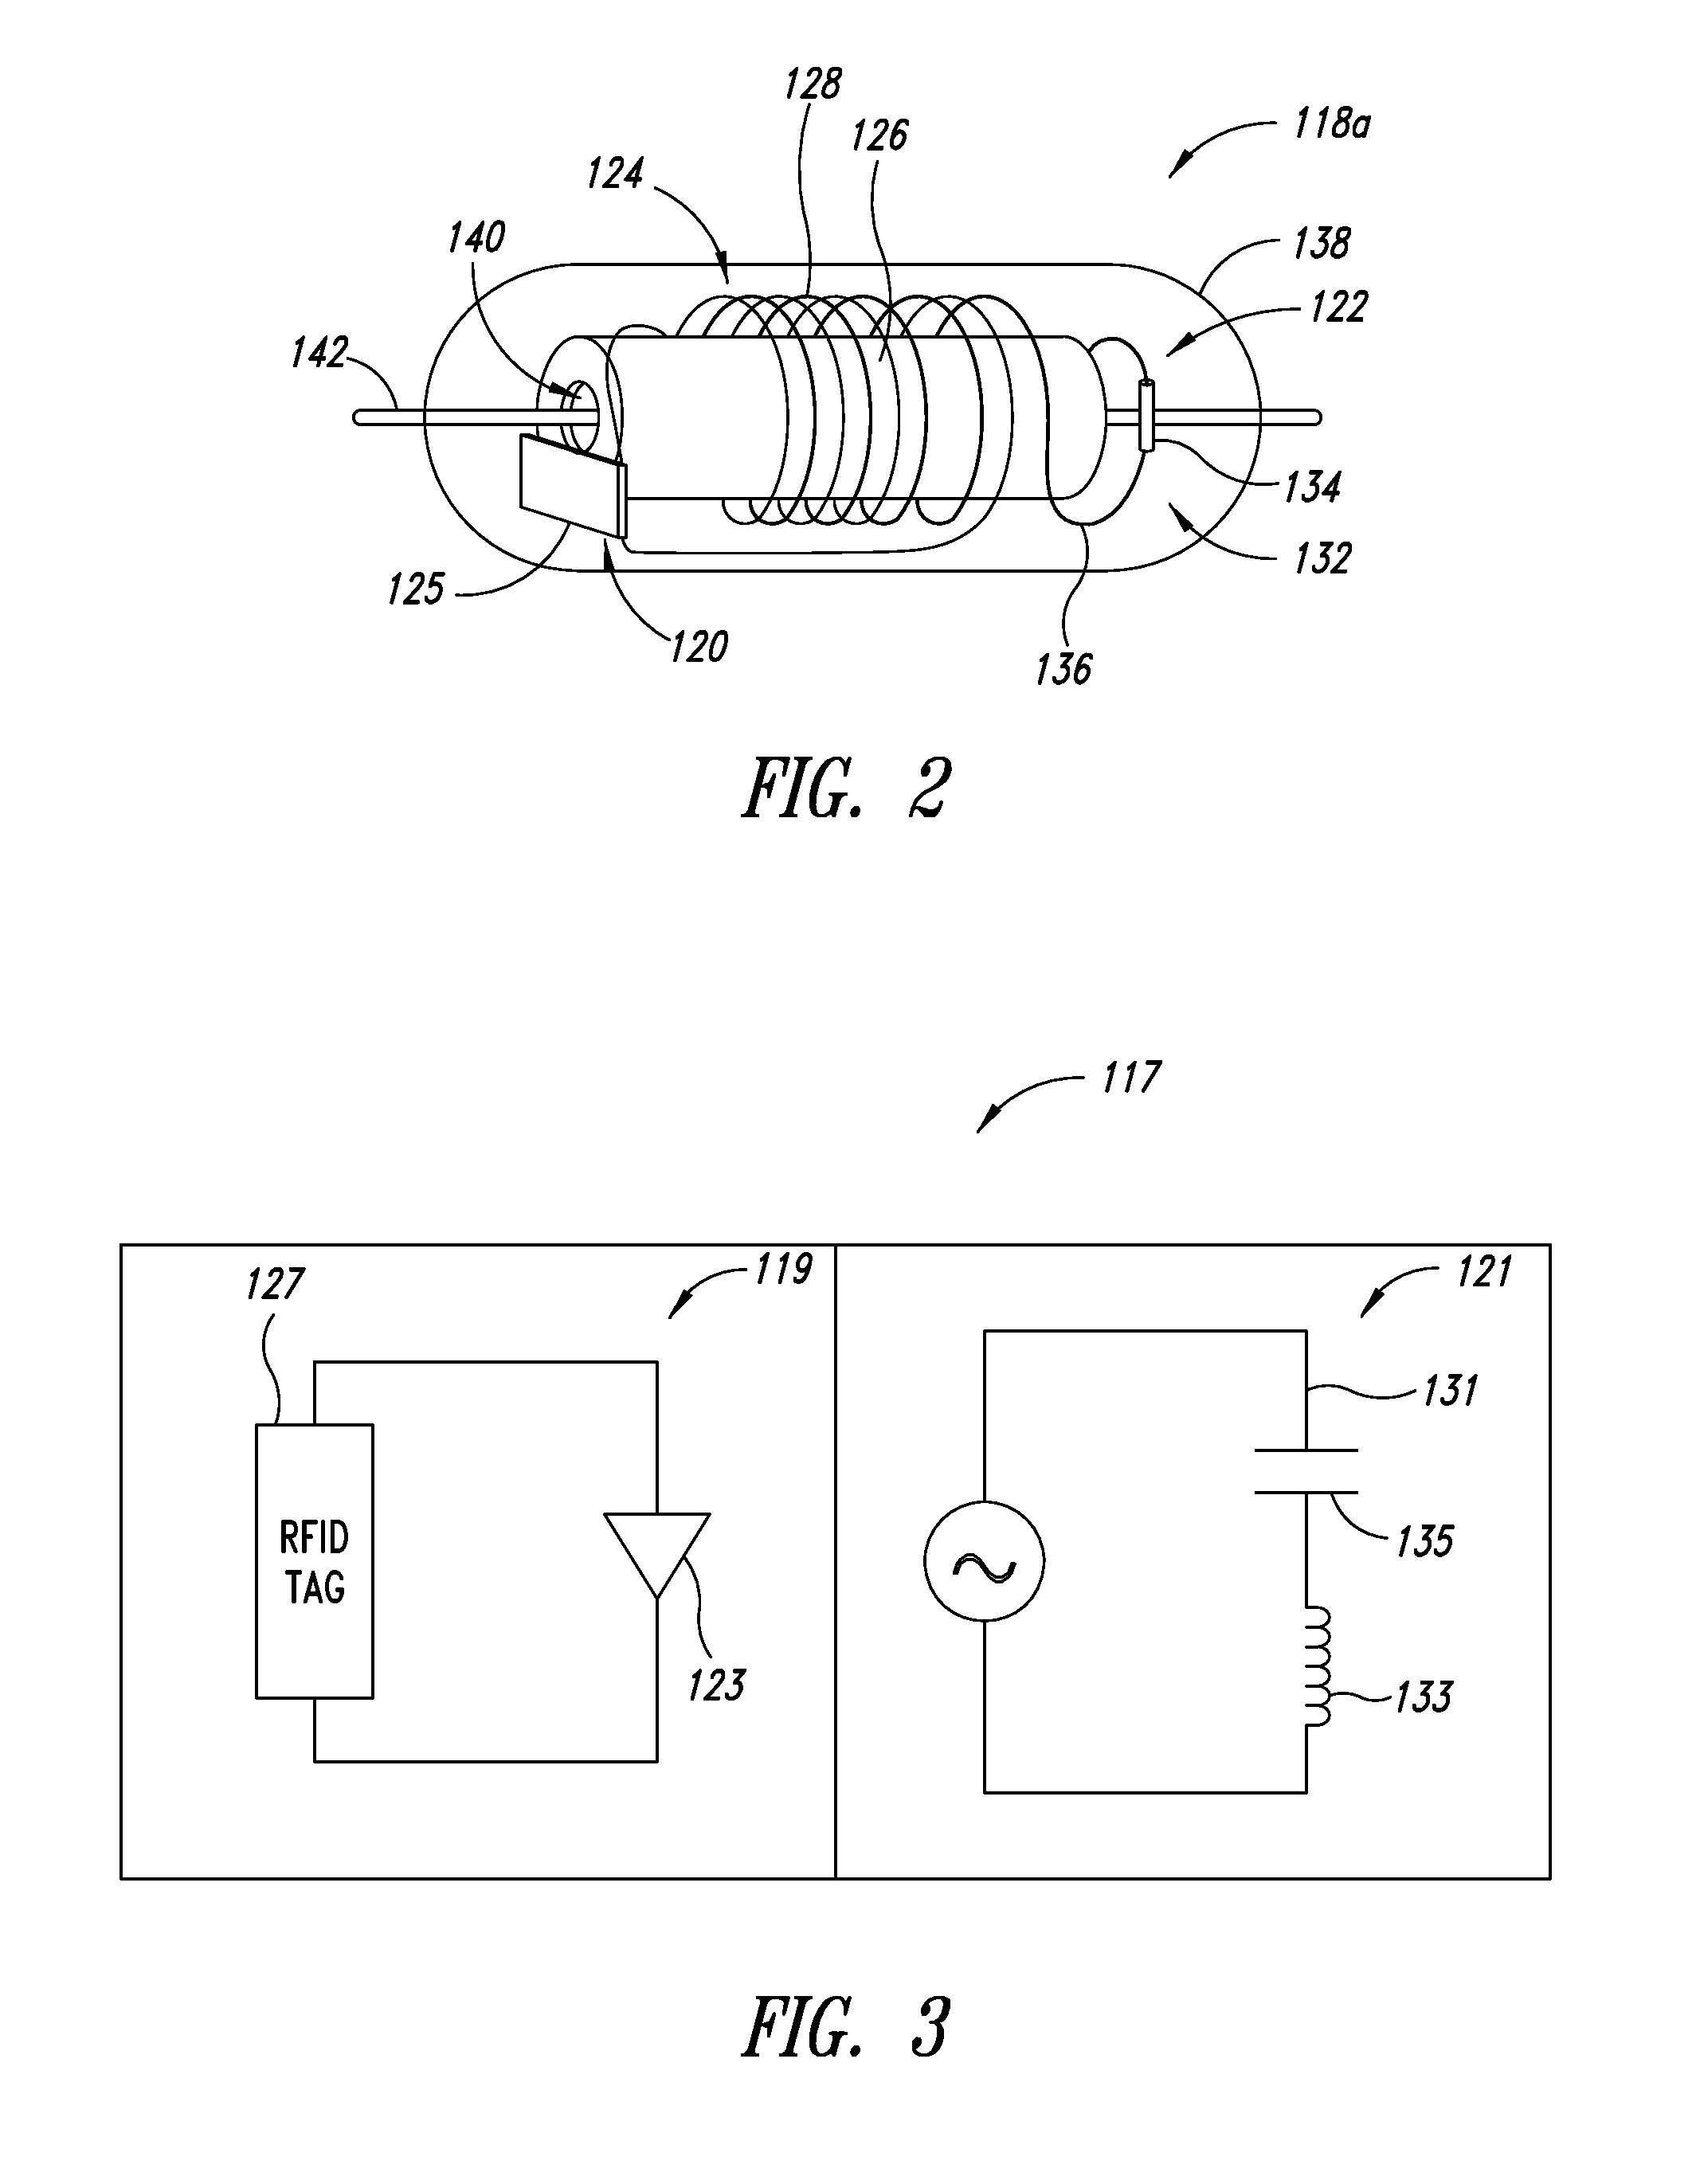 Multi-modal transponder and method and apparatus to detect same